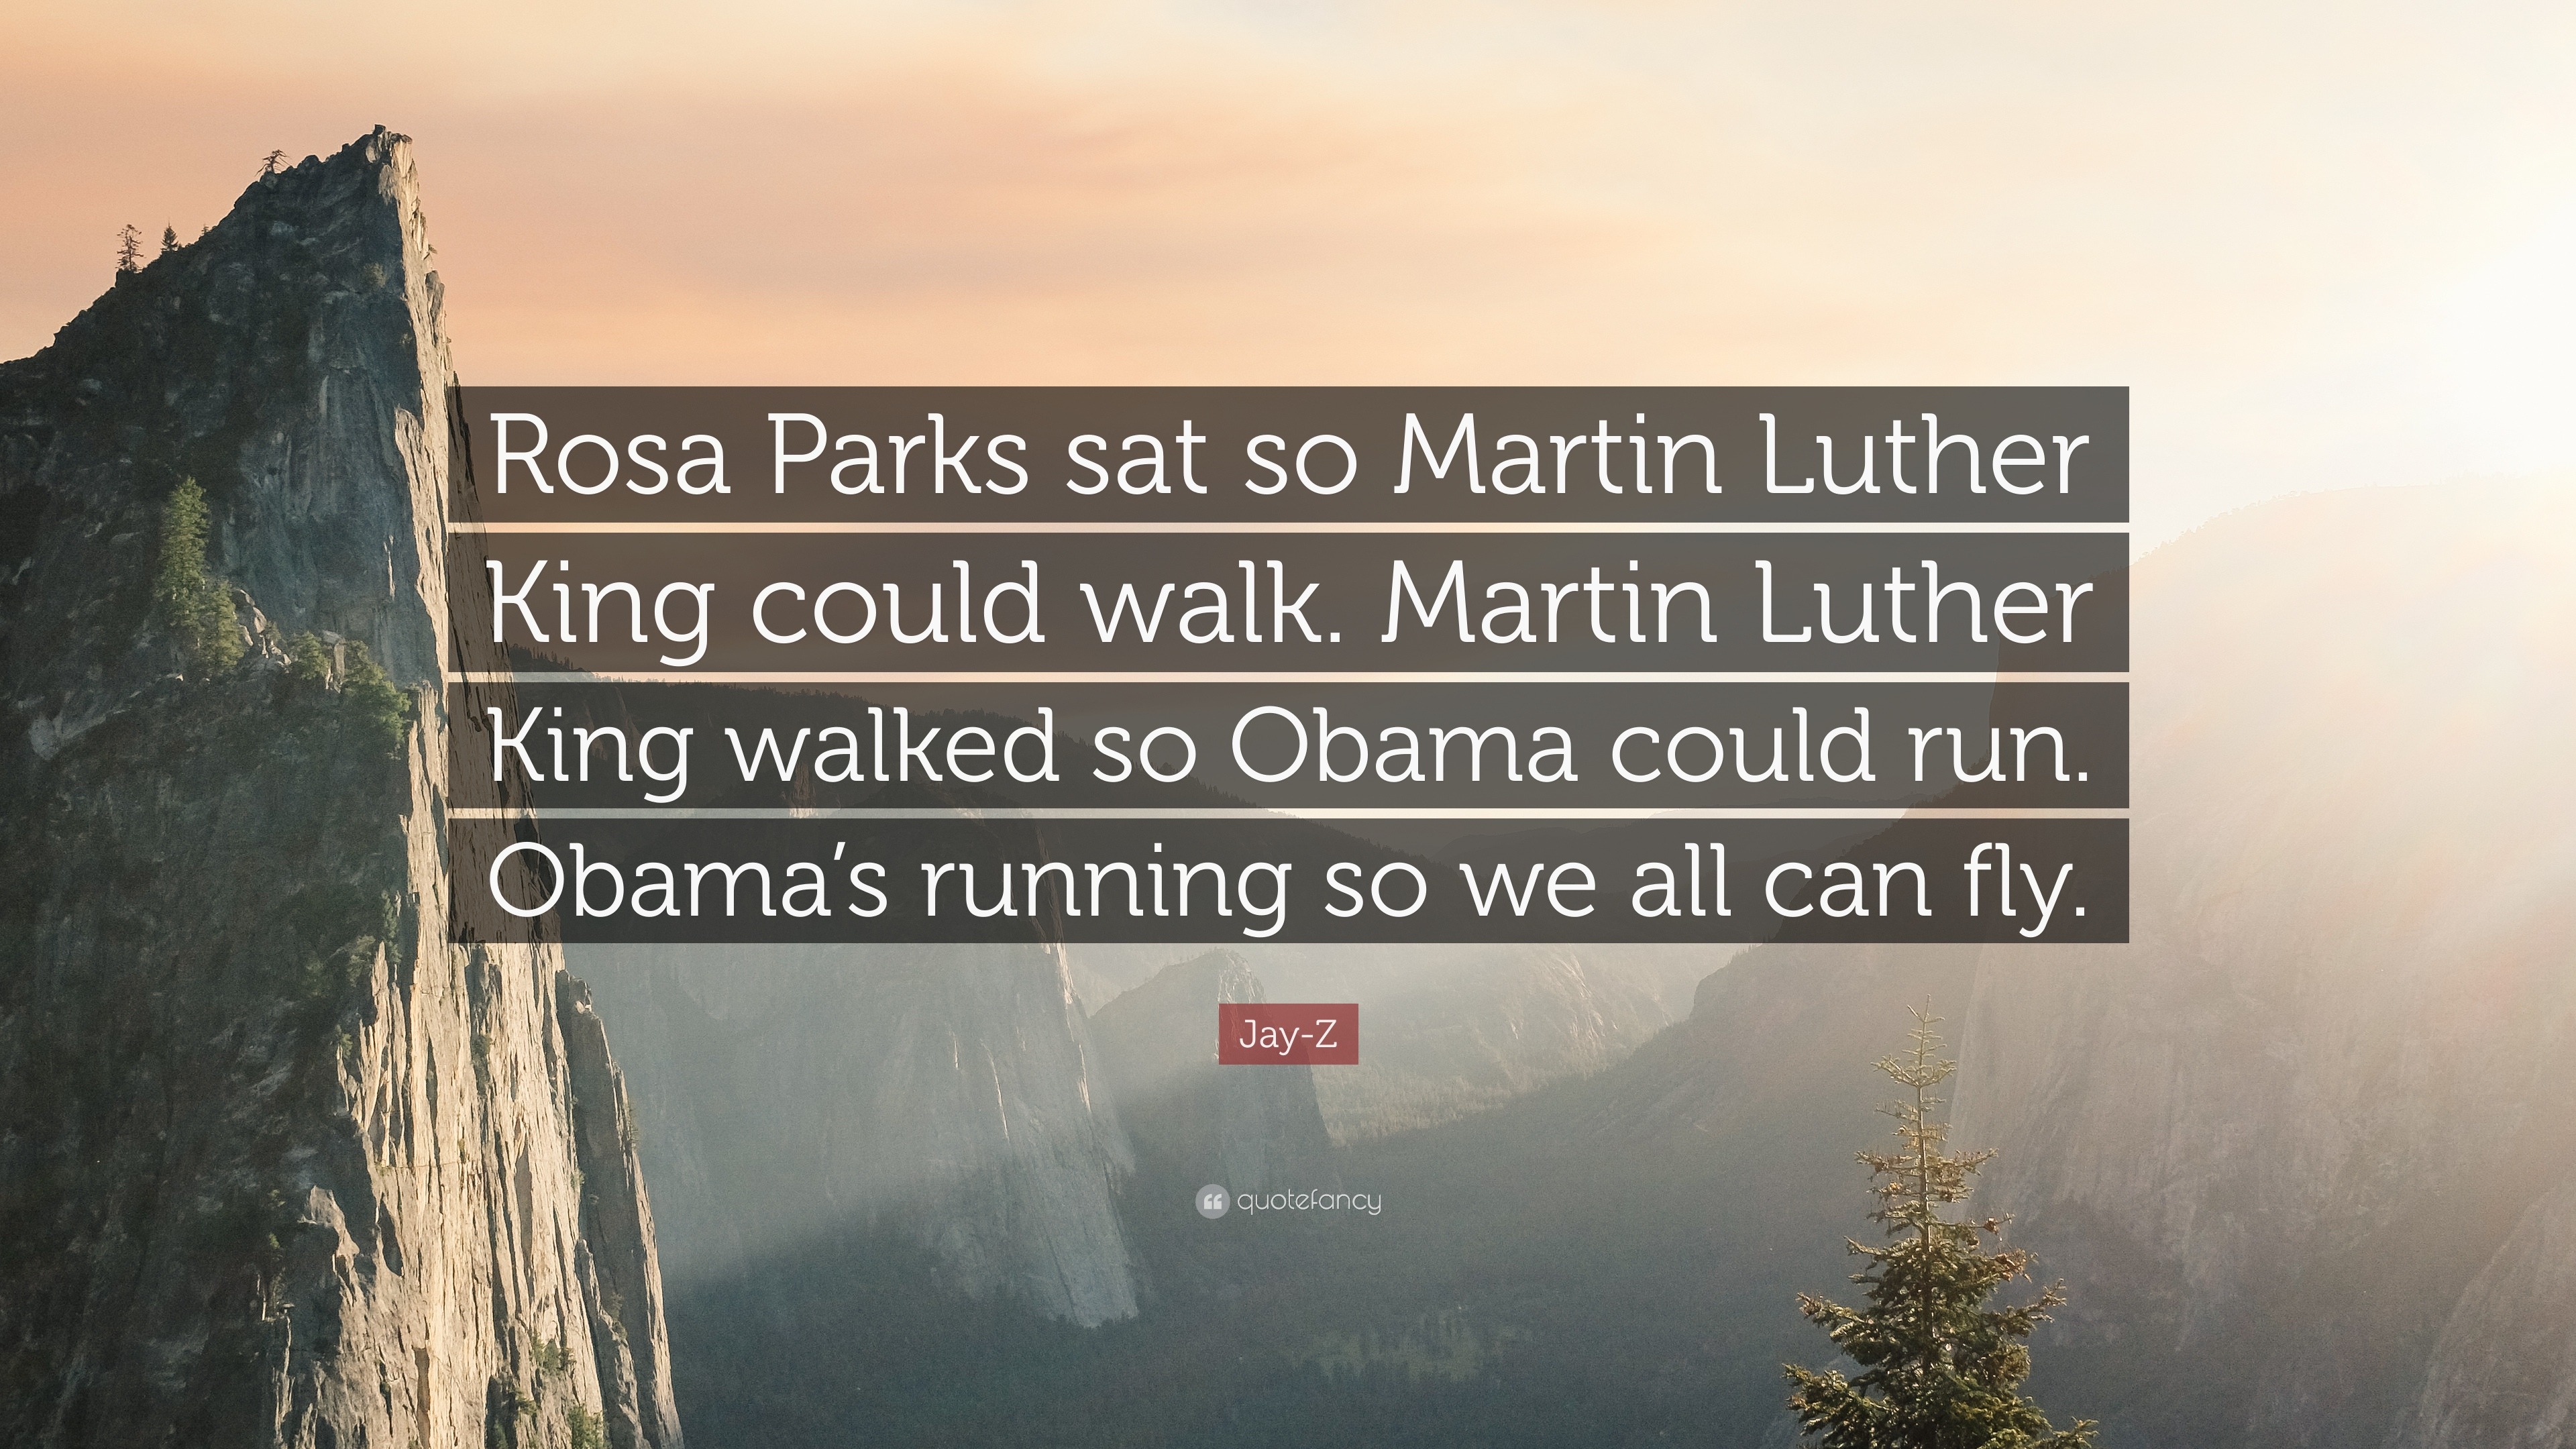 jay-z-quote-rosa-parks-sat-so-martin-luther-king-could-walk-martin